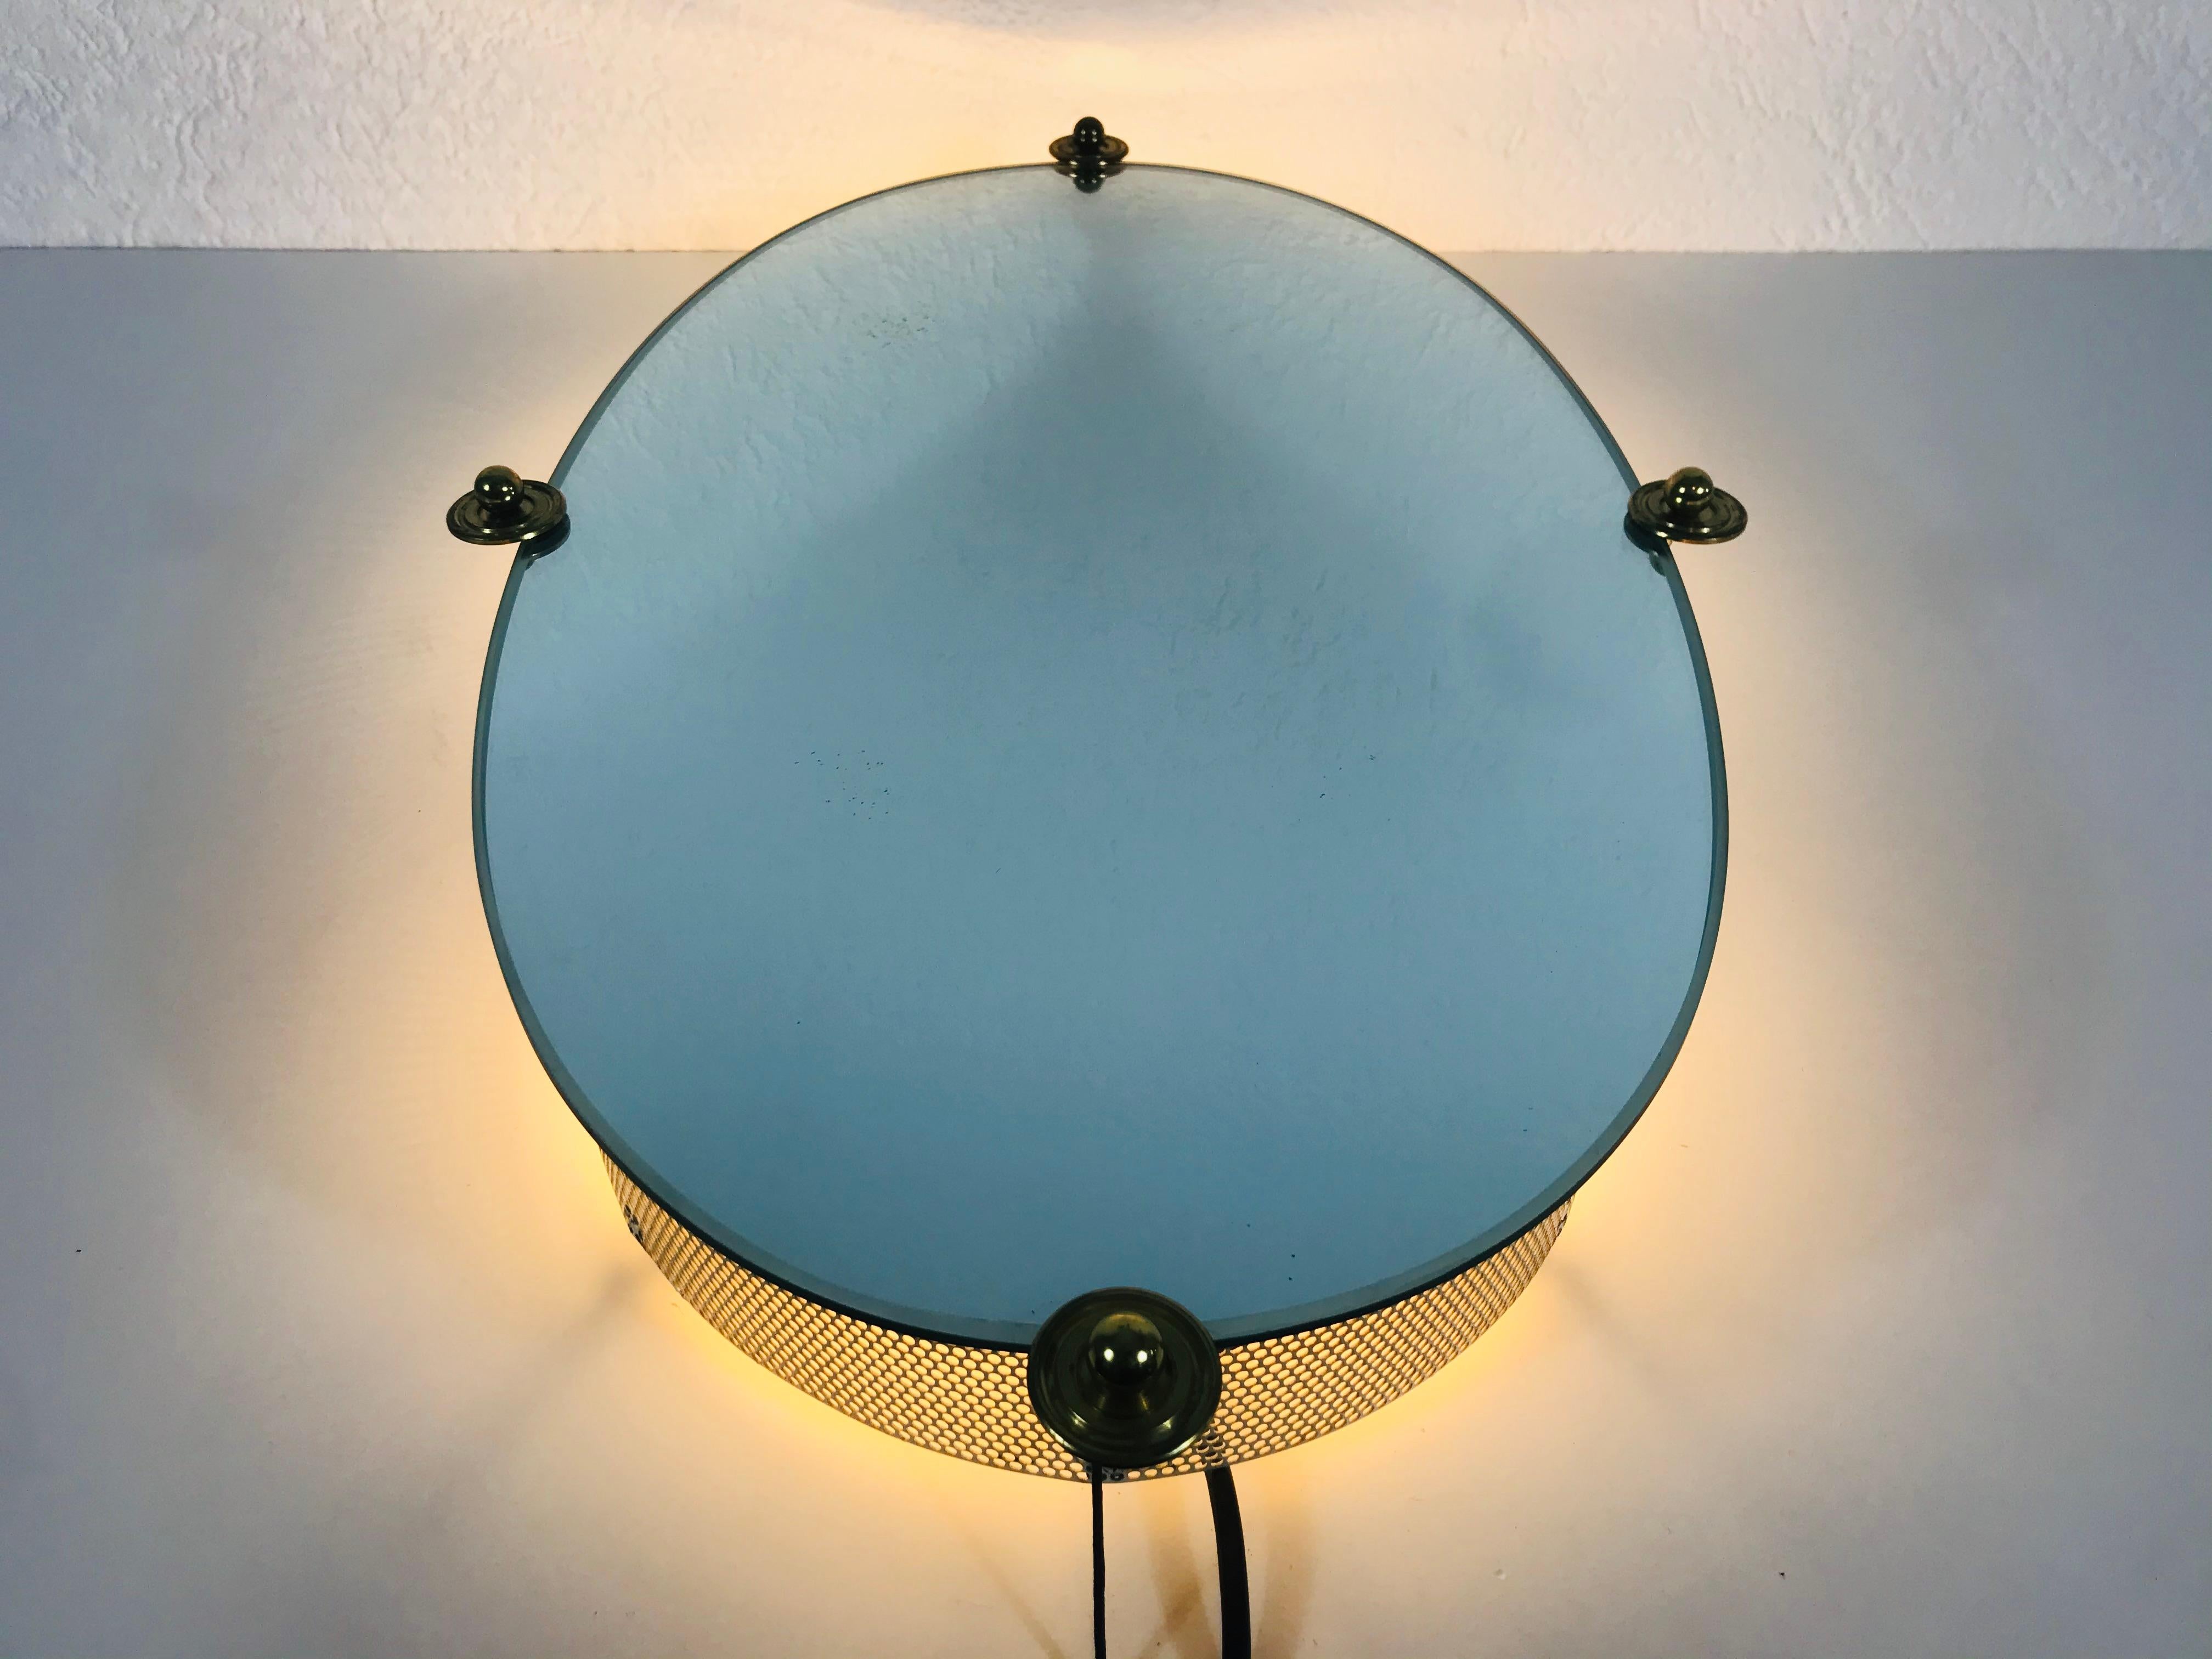 A Hillebrand illuminated wall mirror from the 1960s made in Germany. The mirror has an oval metal design. There are E14 light bulbs inside the frame. 4 brass screws which secure the glass to the aluminium frame. The mirror is in a good vintage